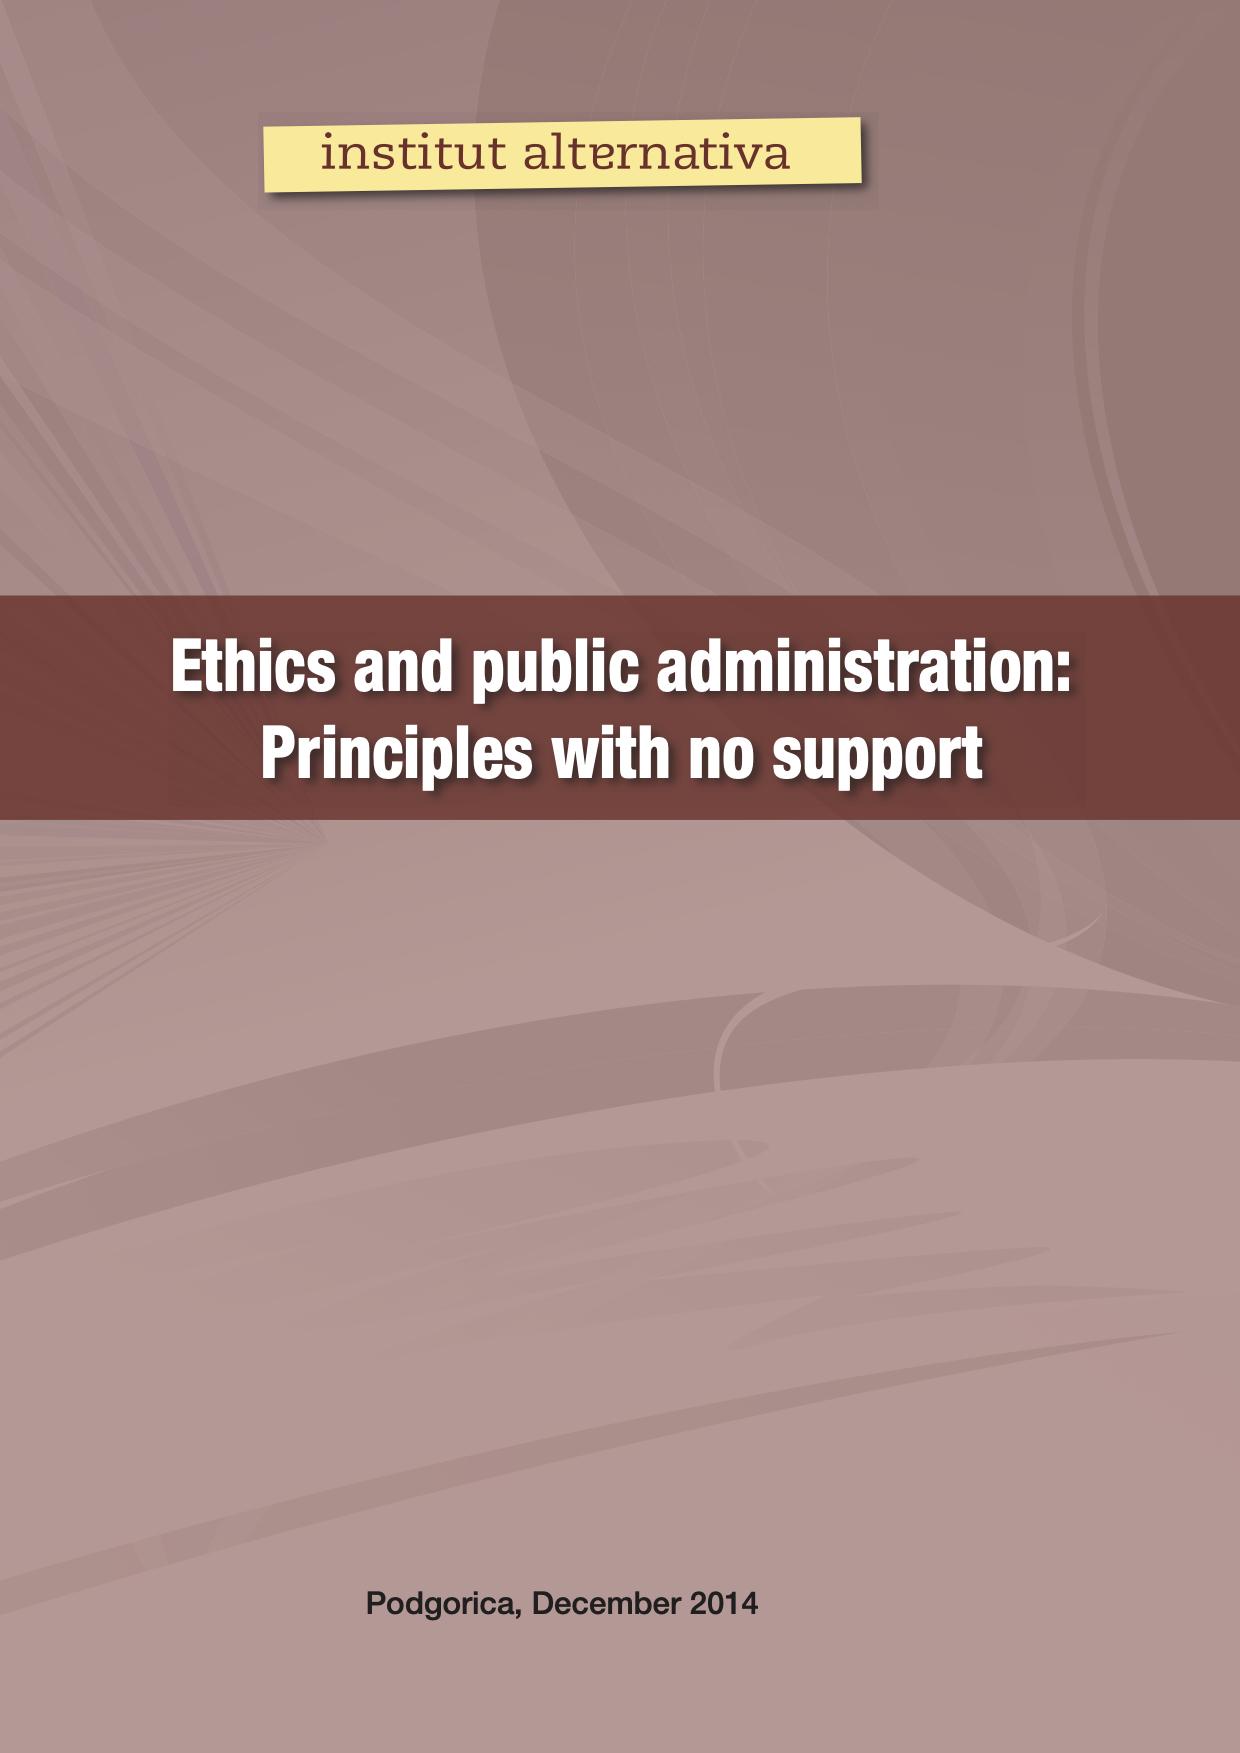 Ethics and public administration: Principles with no support